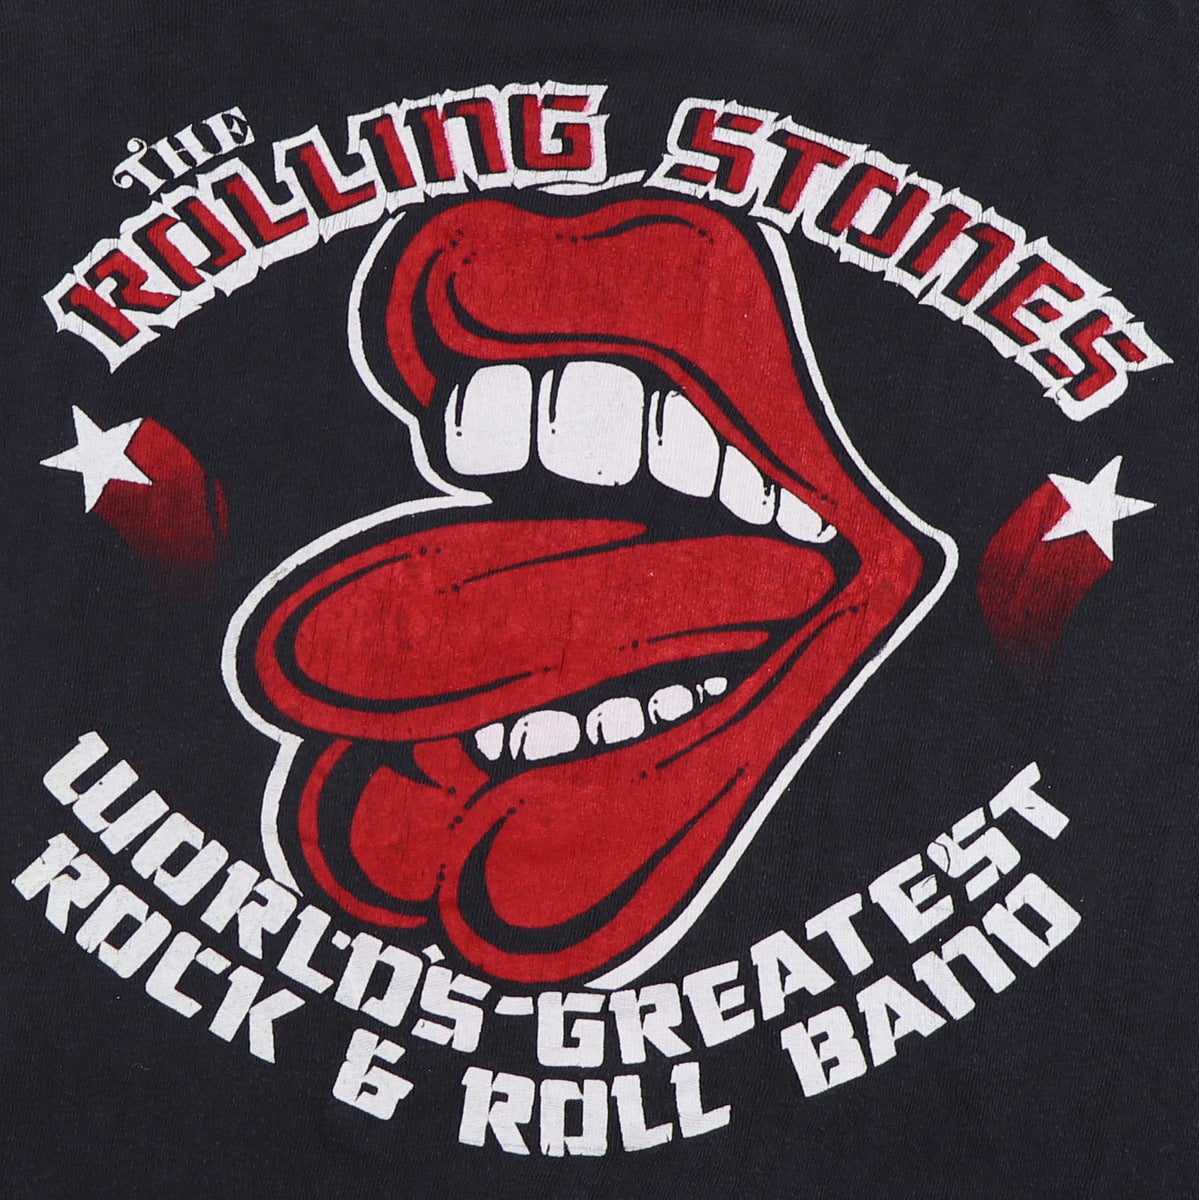 1978 Rolling Stones Tour Of North America Shirt